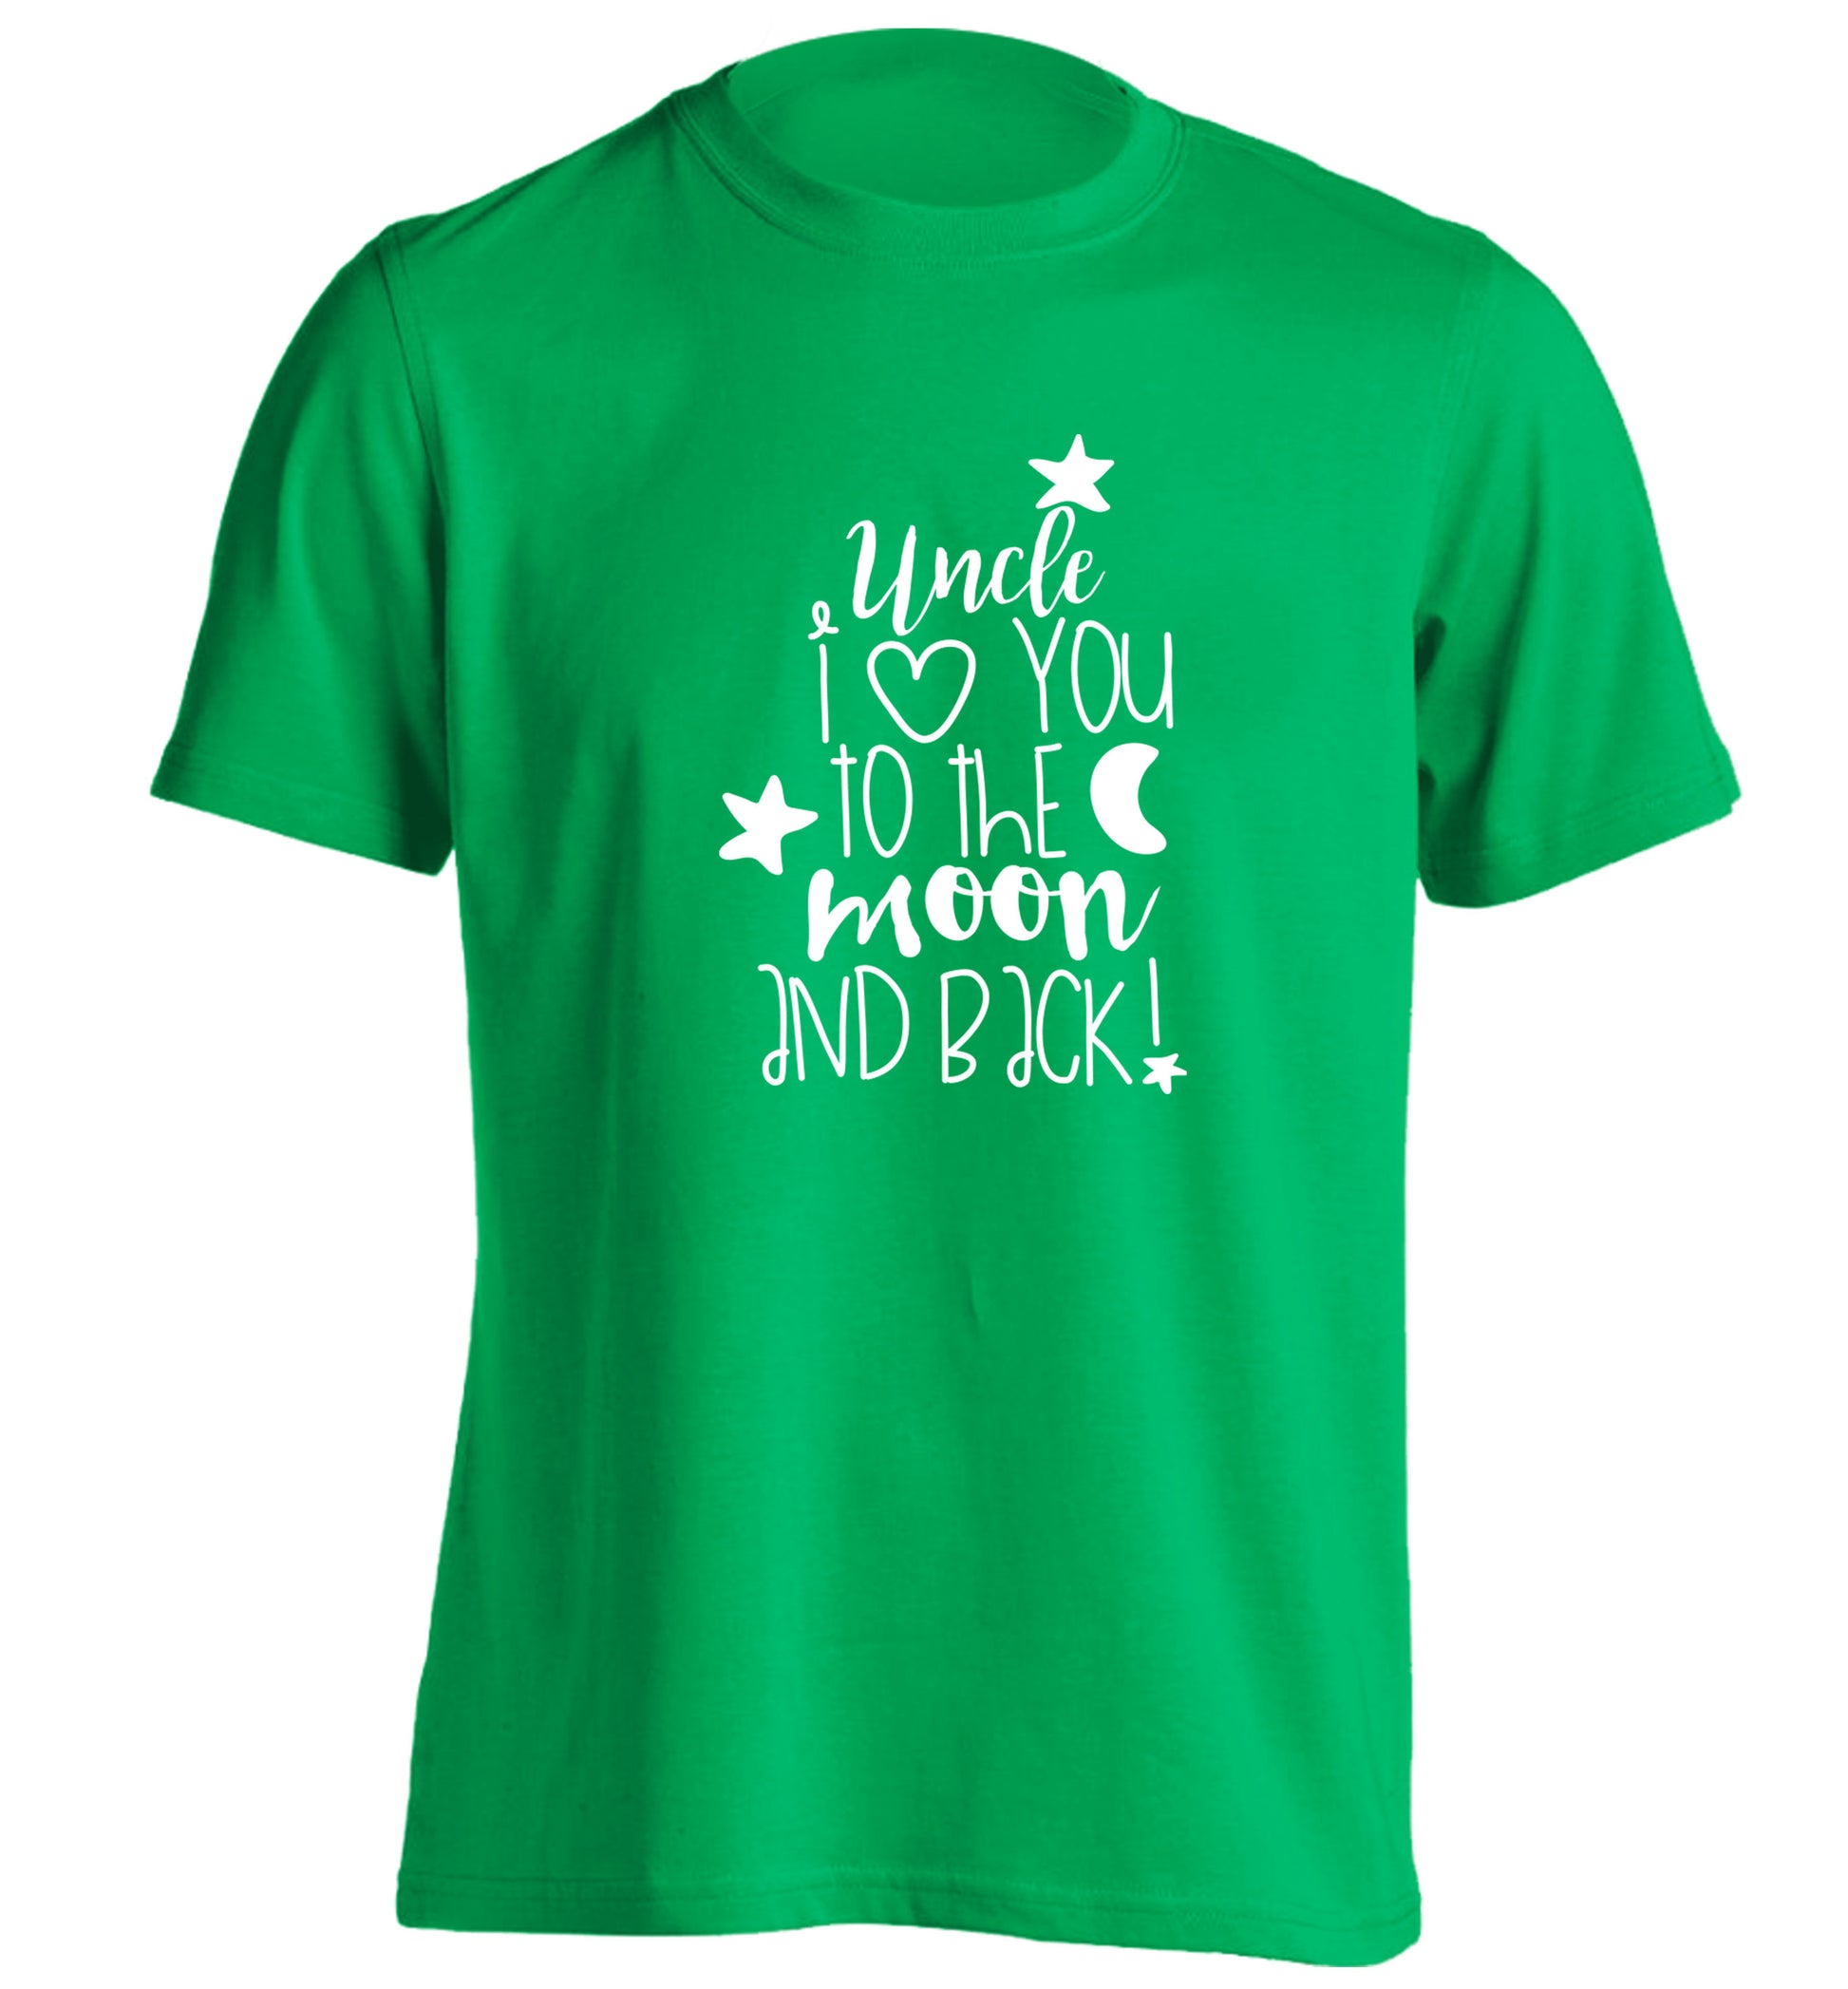 Uncle I love you to the moon and back adults unisex green Tshirt 2XL